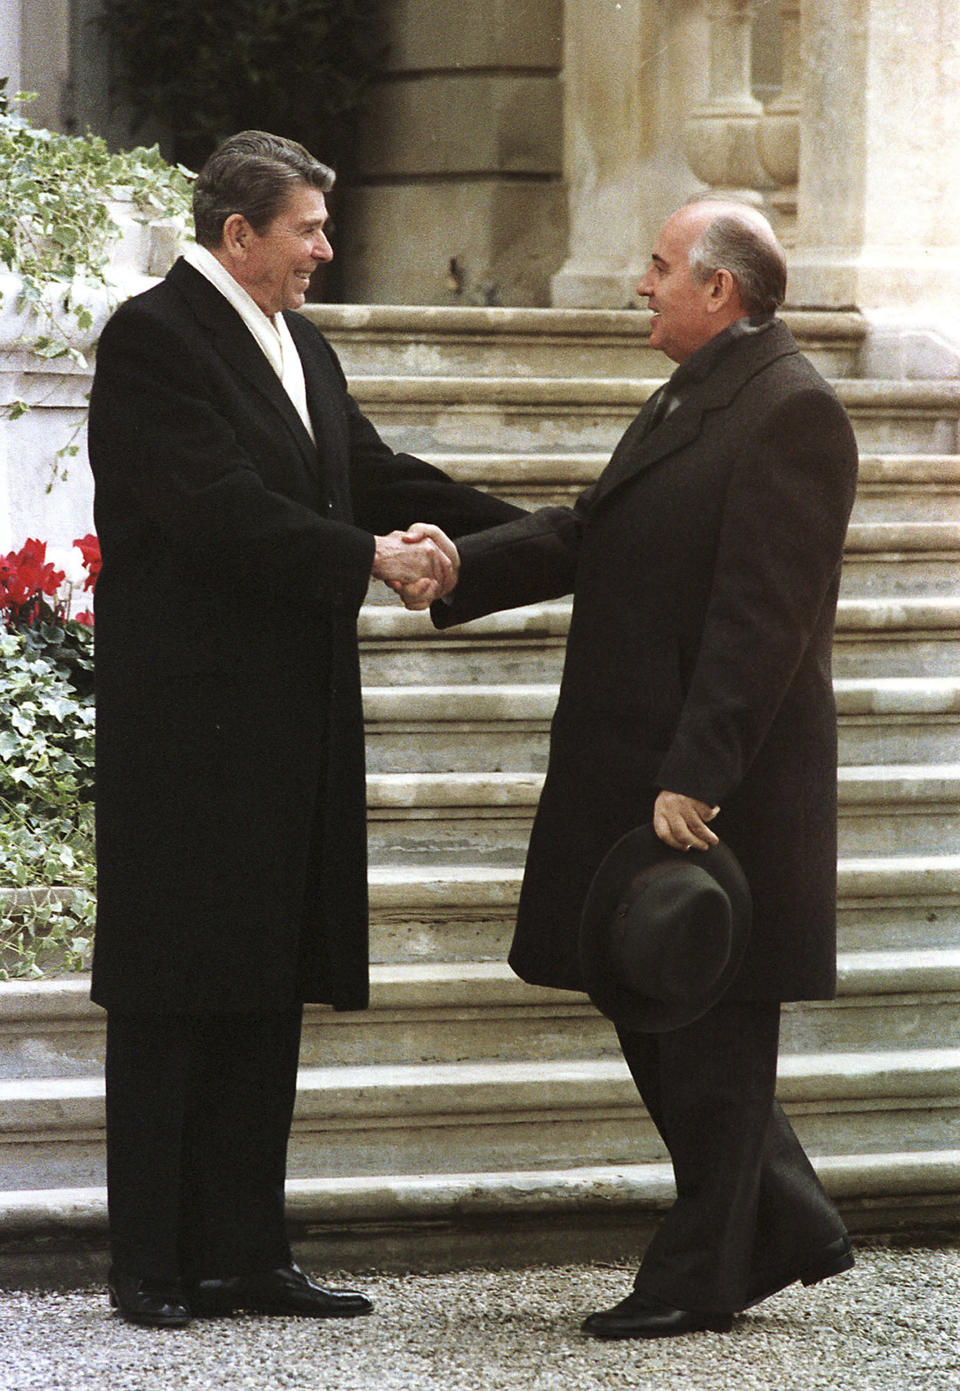 FILE - U.S. President Ronald Reagan, left, and Soviet leader Mikhail Gorbachev meet for the first time at the villa Fleur D'Eau at Versoix near Geneva, Nov. 19, 1985. Gorbachev signed two landmark arms agreements with the United States. He freed political prisoners, allowed open debate and multi-candidate elections, gave his countrymen freedom to travel and halted religious oppression. (AP Photo/Scott Stewart, File)